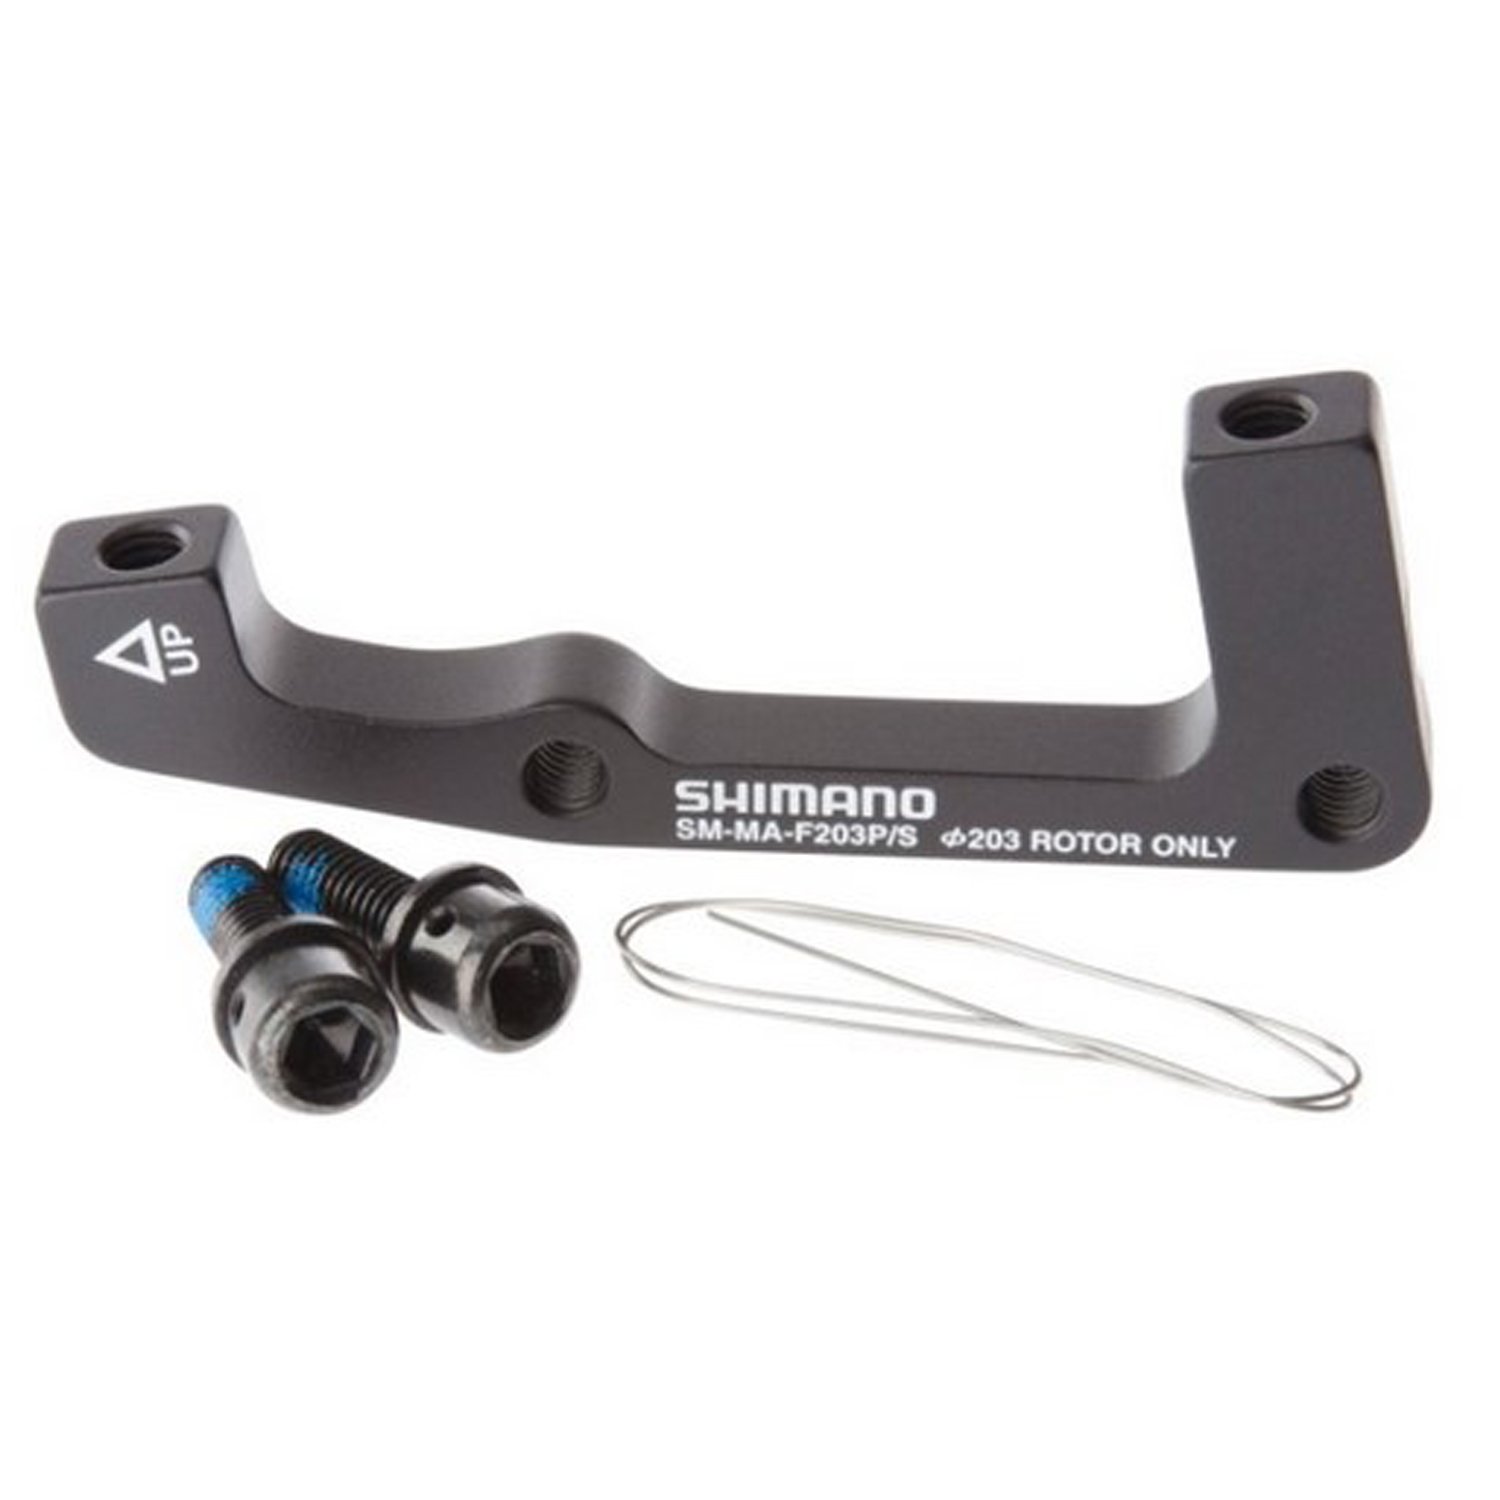 Адаптер дискового тормоза Shimano from Postmount brake to IS2000 frame, 203 mm, черный, УТ000077864 адаптер дискового тормоза shimano flatmount disc brake rear adapter for fm to fm from 140 mm to 160 mm ra100062